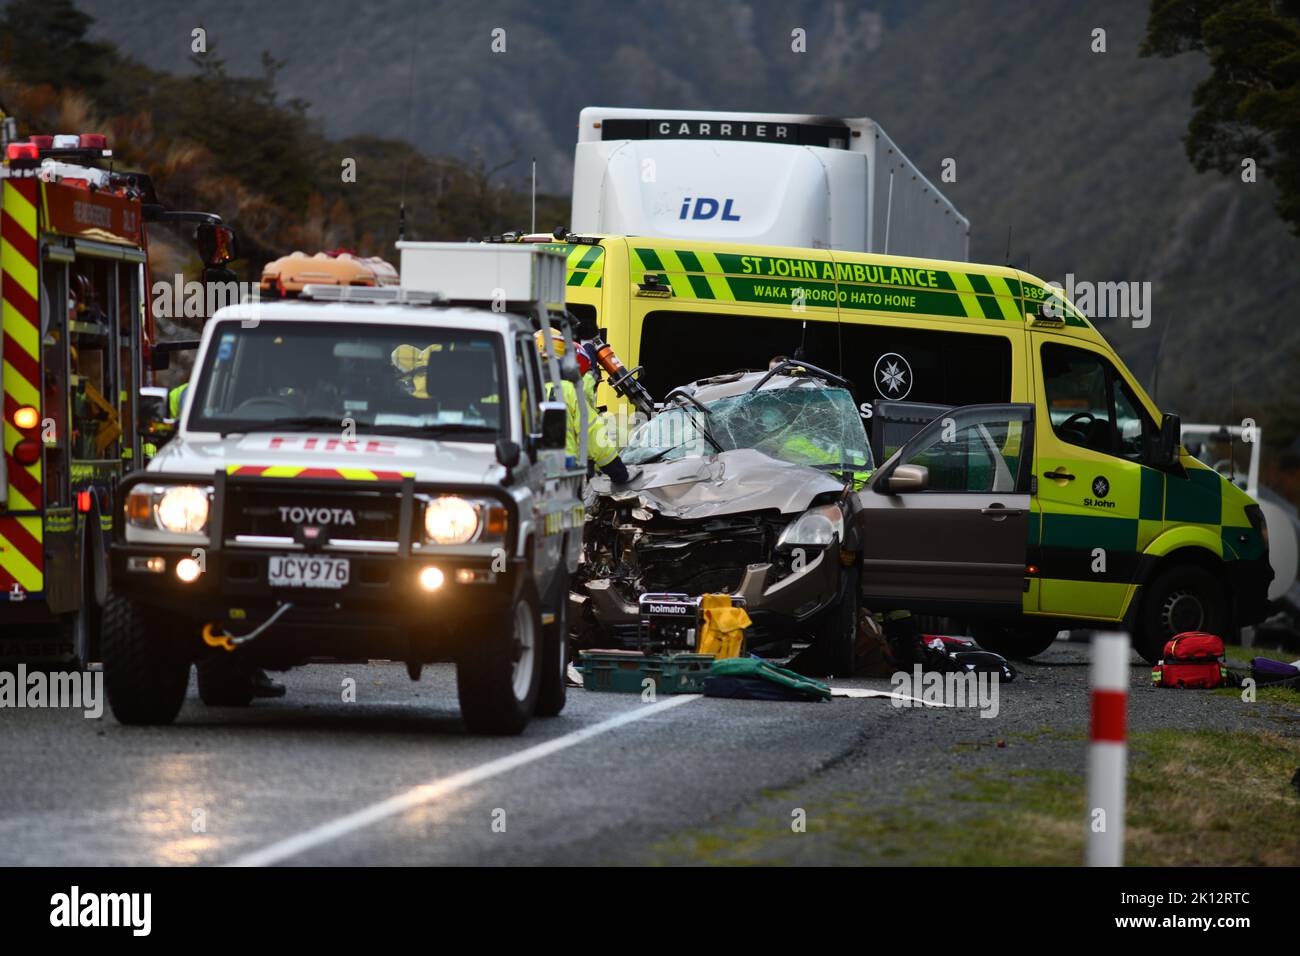 ARTHUR'S PASS, NEW ZEALAND, SEPTEMBER 5, 2022: Emergency teams respond to a single car accident after the driver lost control on black ice on State Highway 73 while crossing the Southern Alps. Grainy image shot in poor morning light. Stock Photo